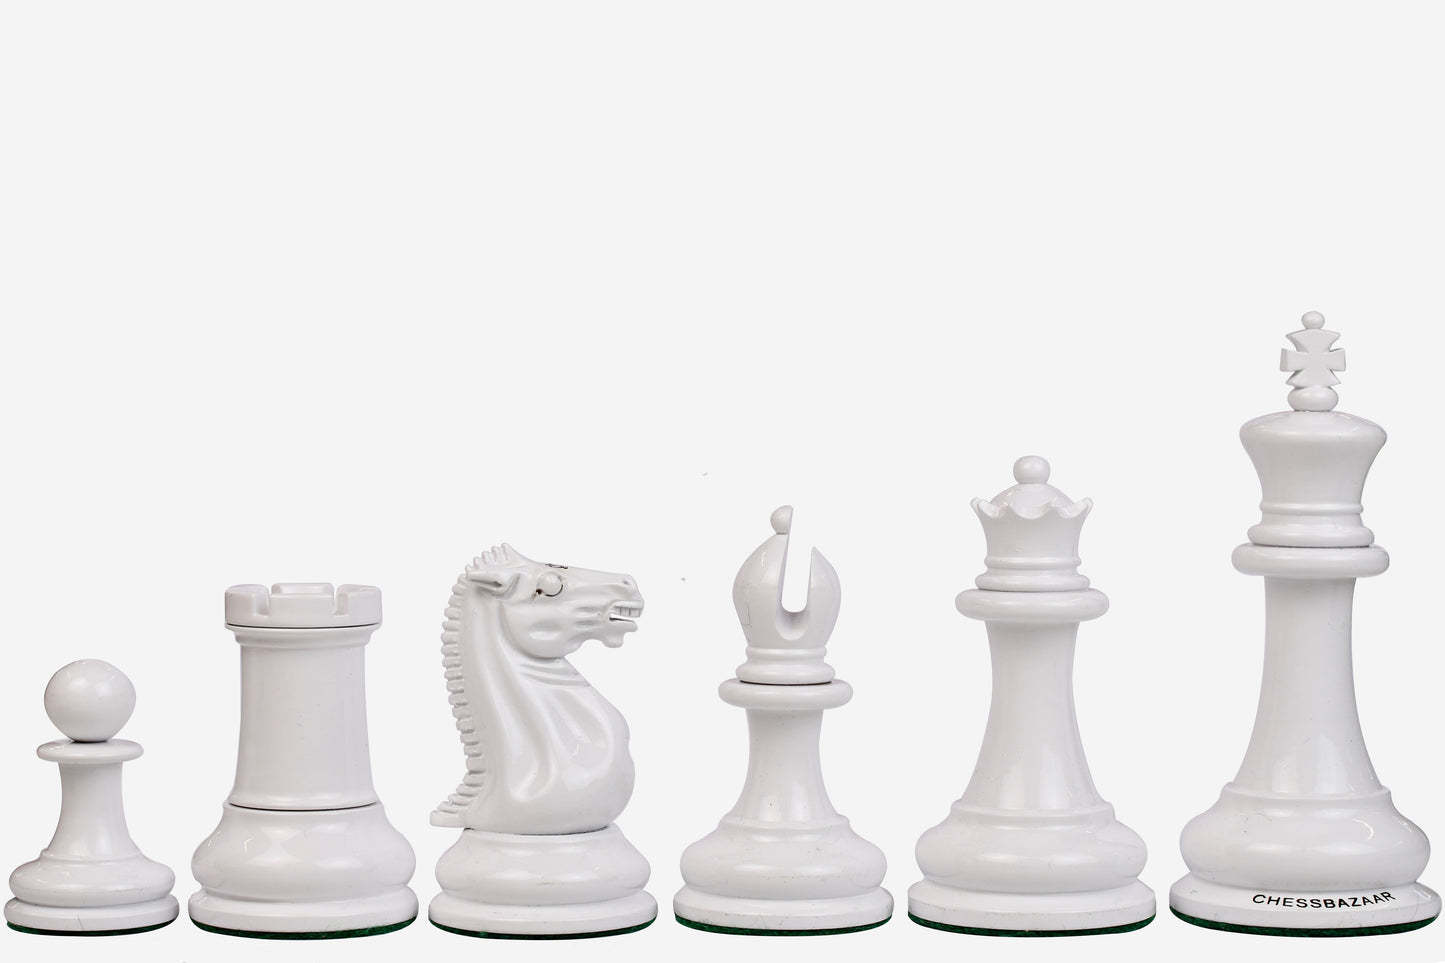 Reproduced 1849 Original Staunton Pattern Chess Pieces in Lacquer Finished Painted Crimson & Ivory White - 4.5" King